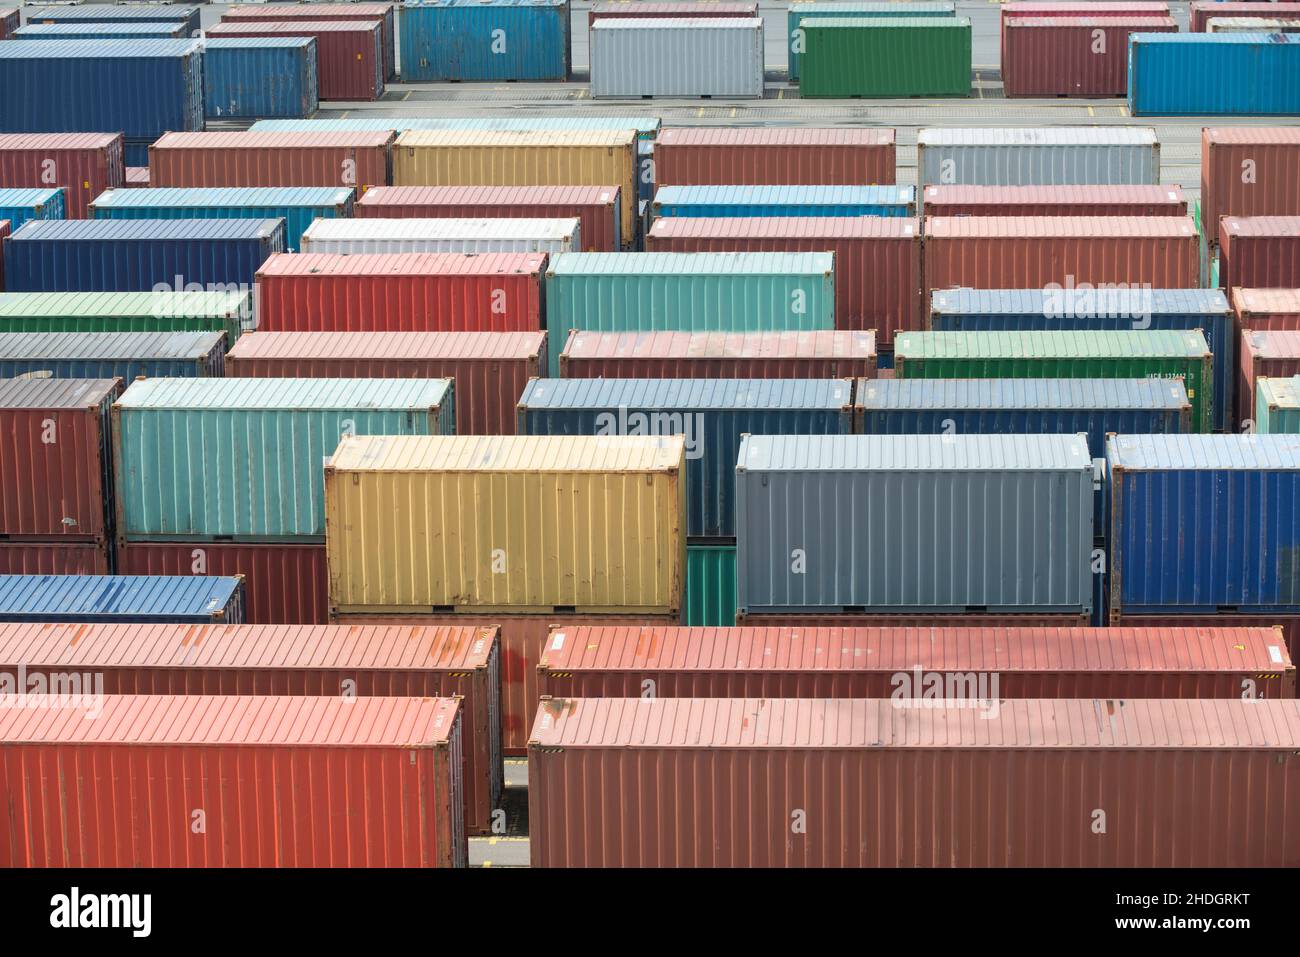 cargo container, cargo, import, export, cargo containers, cargos, imports, exports Stock Photo